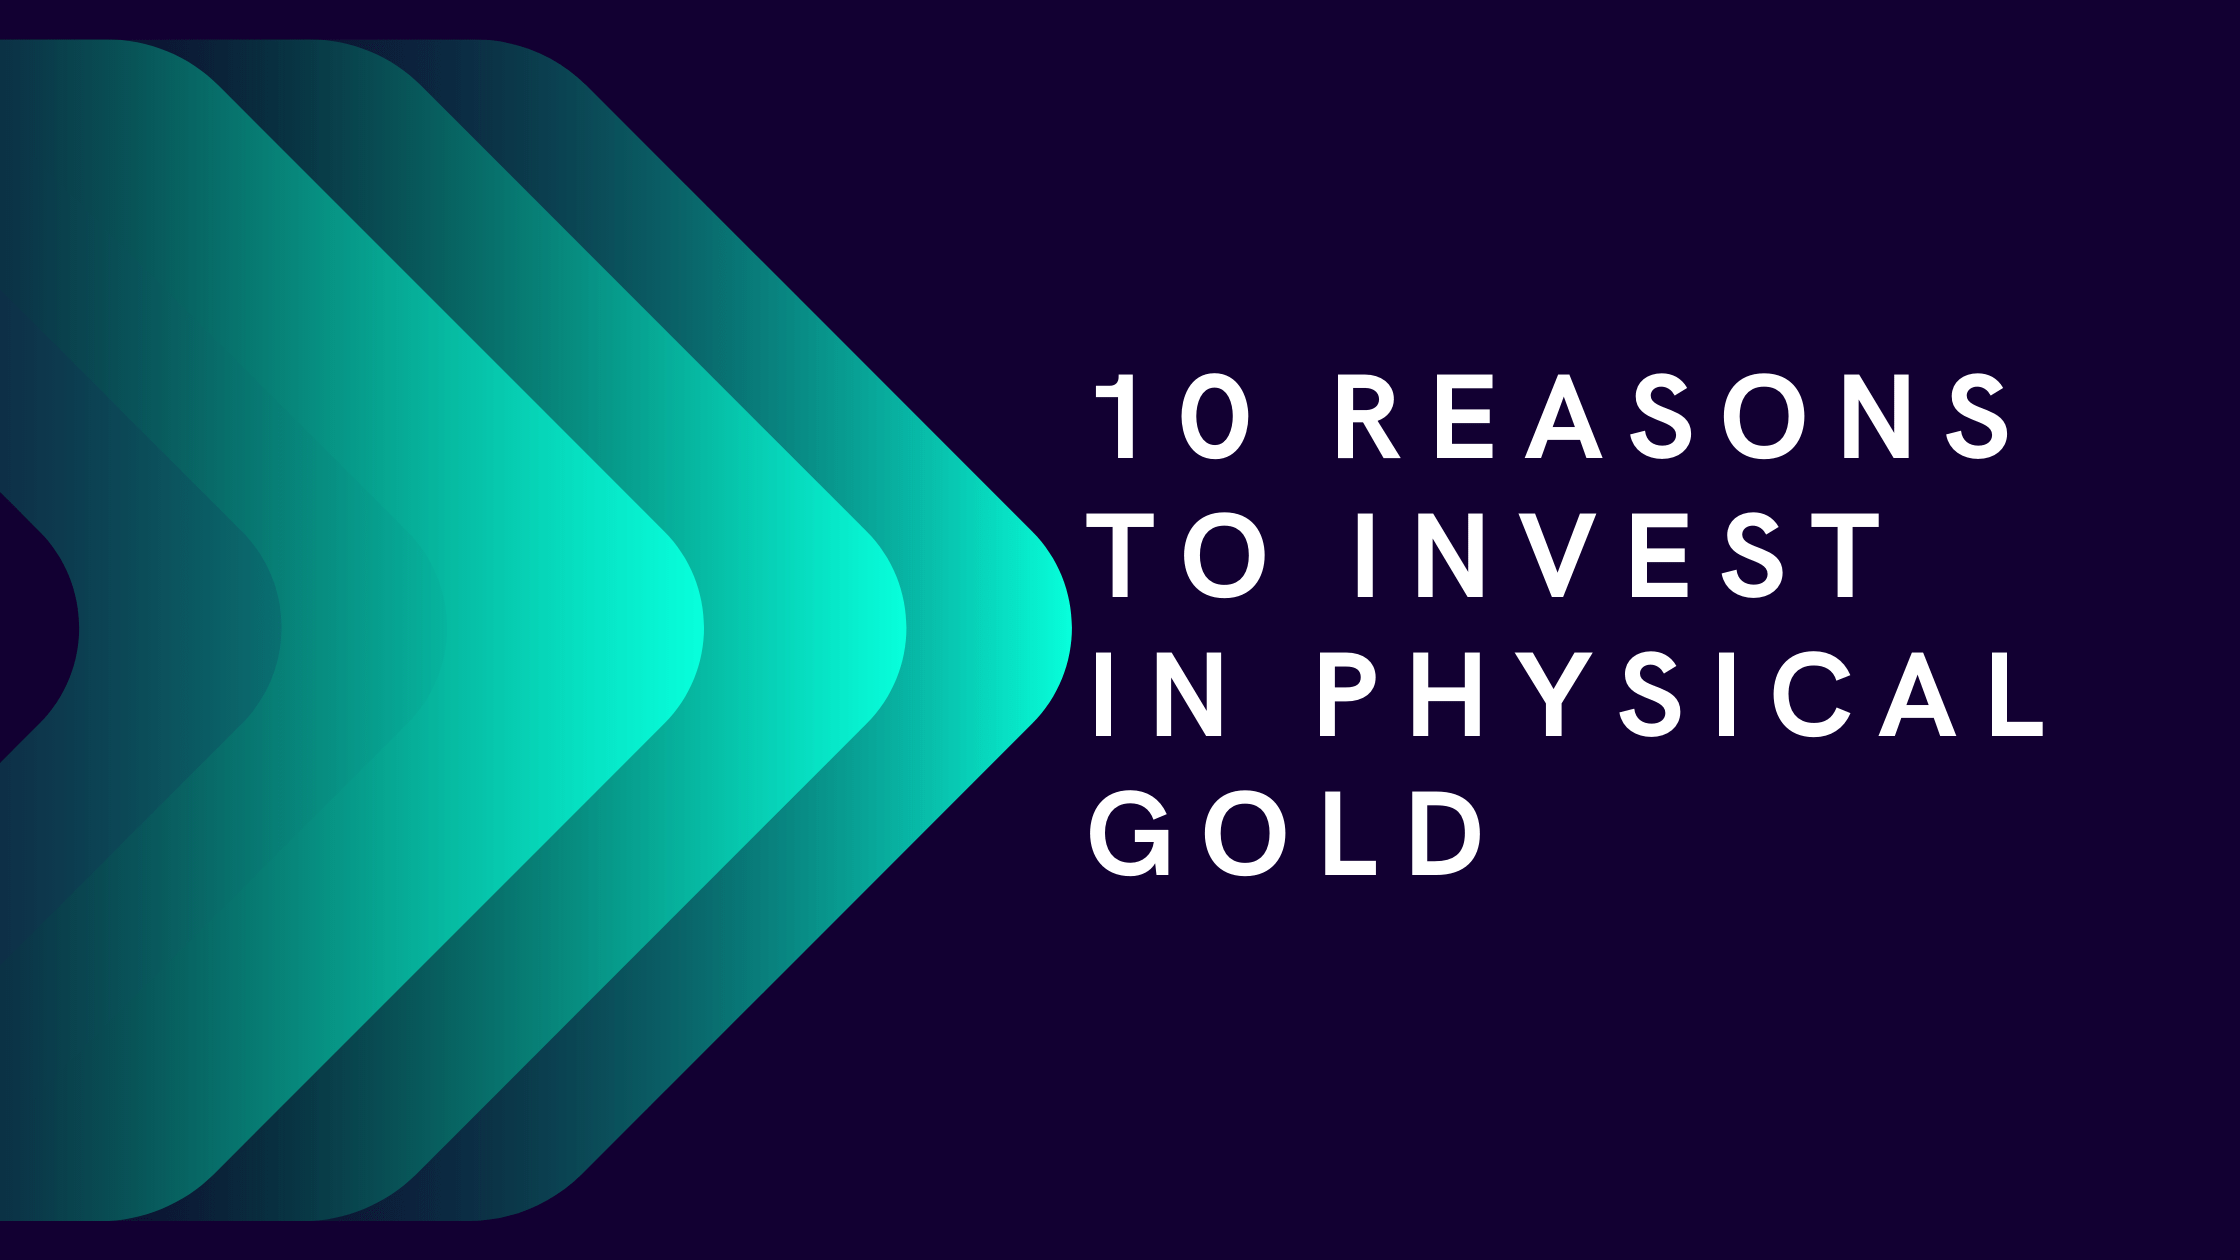 Invest in Physical Gold